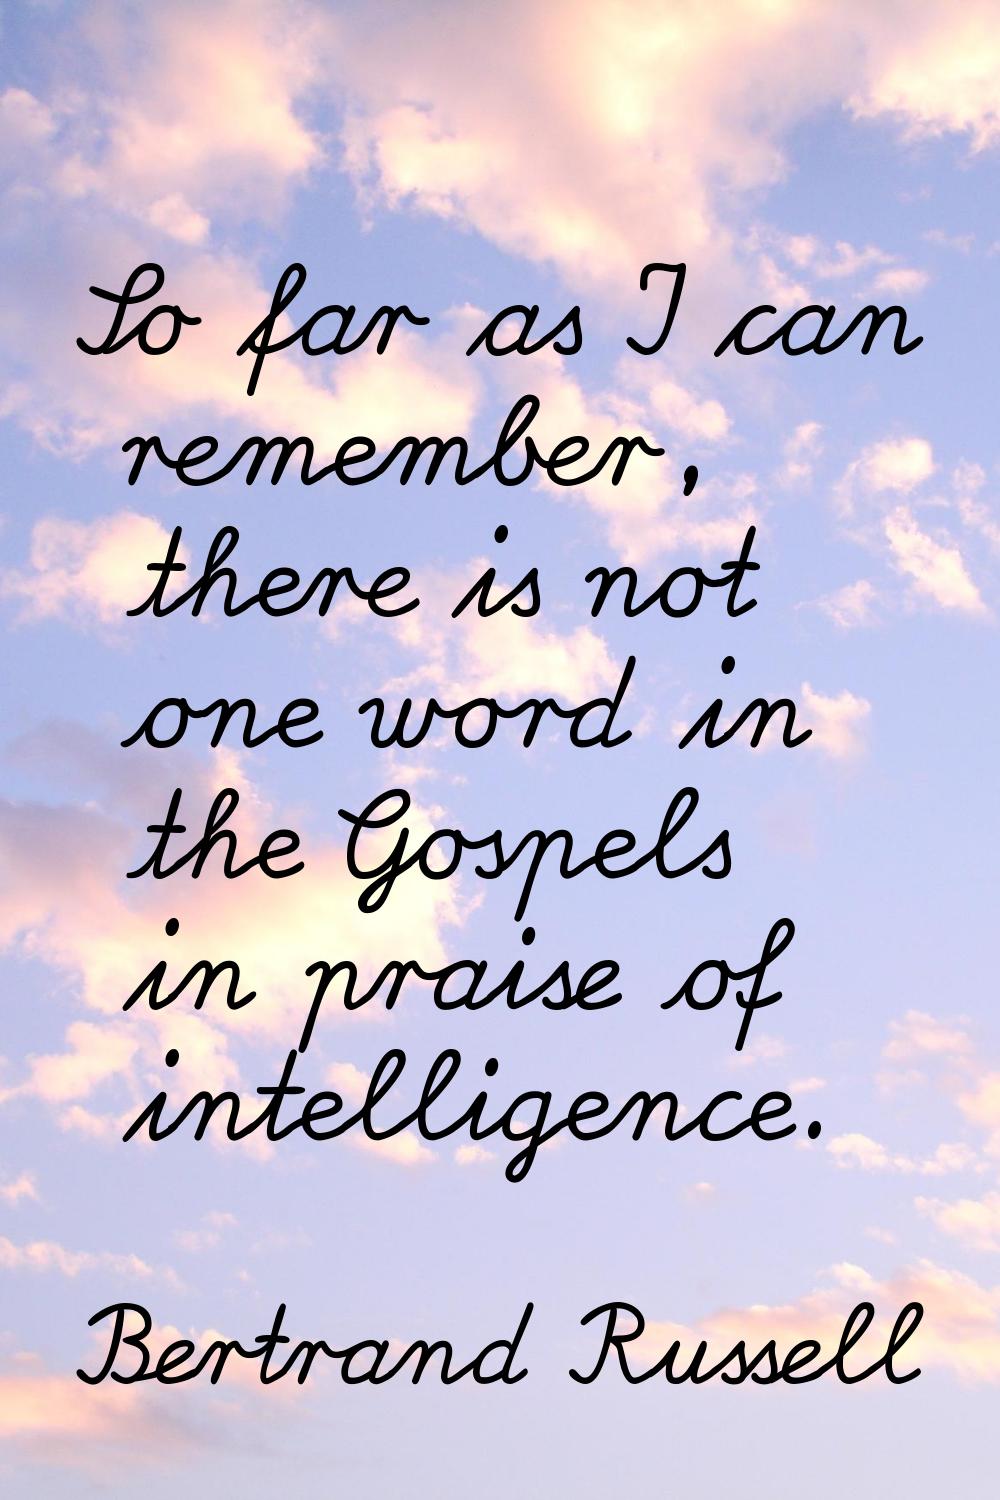 So far as I can remember, there is not one word in the Gospels in praise of intelligence.